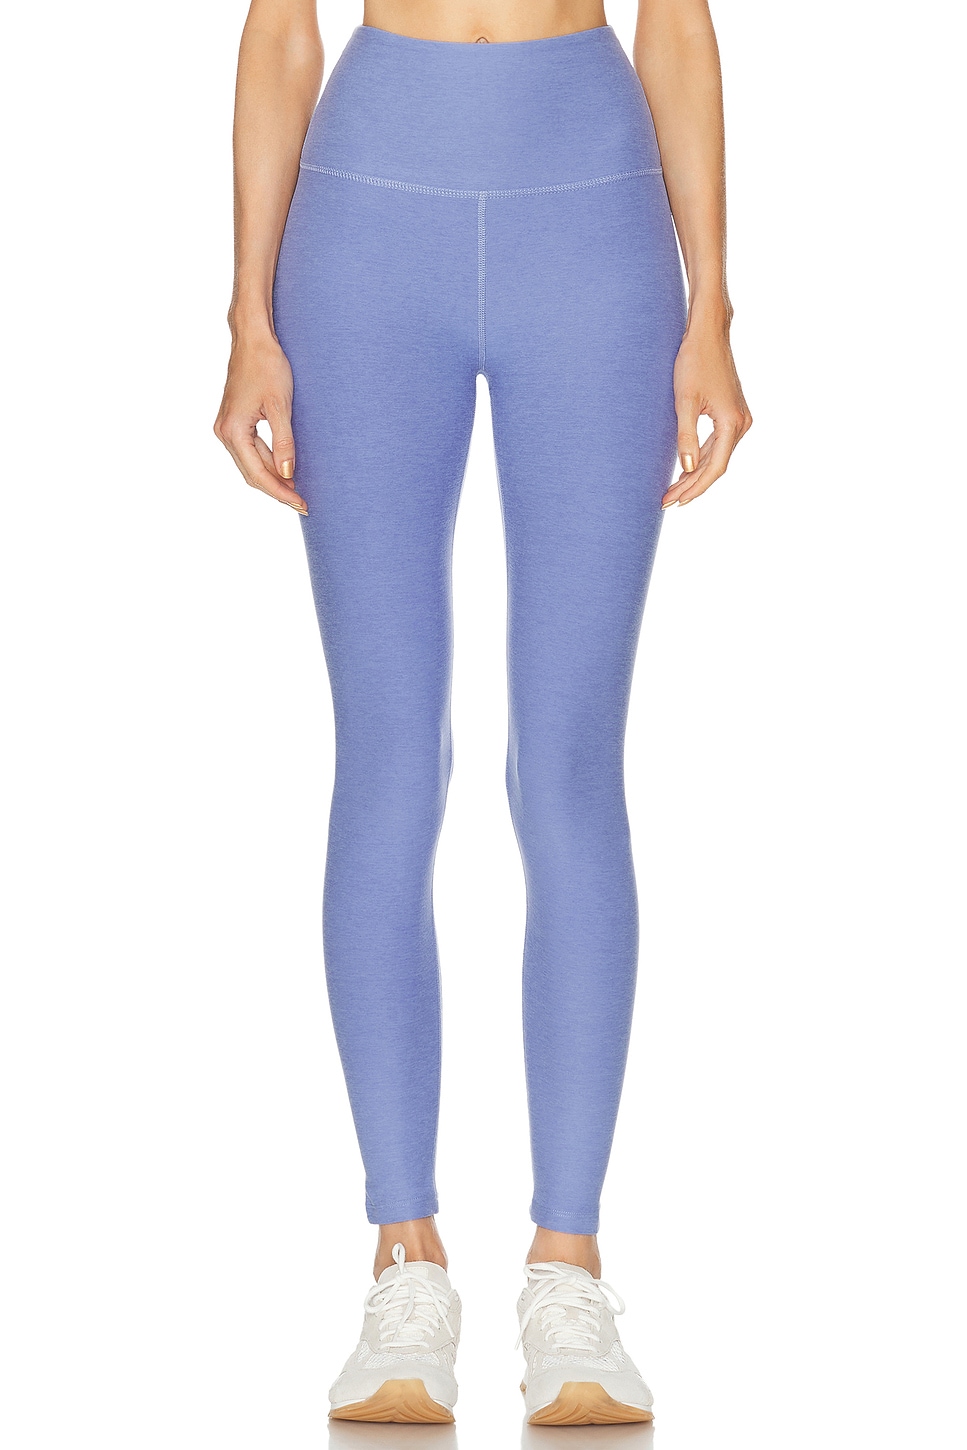 Spacedye Caught in The Midi High Waisted Legging in Blue